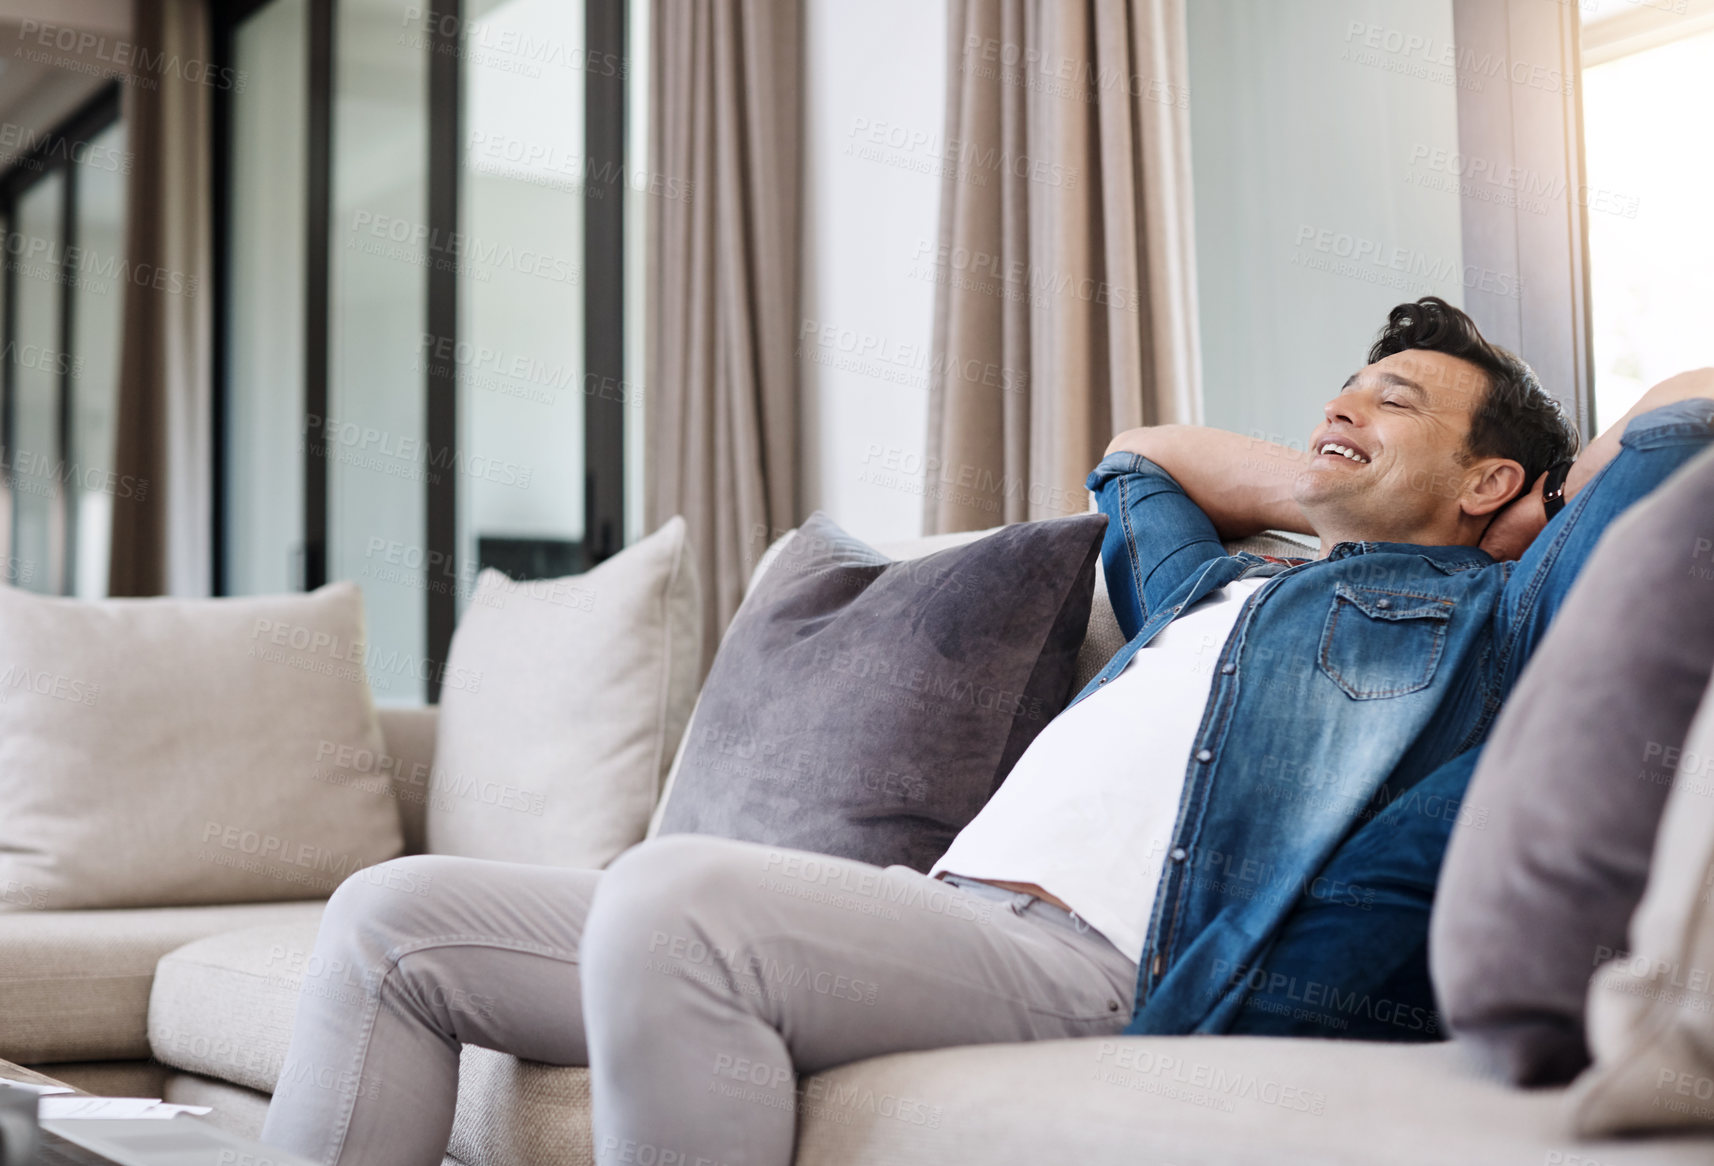 Buy stock photo Shot of a happy young man relaxing on the sofa at home